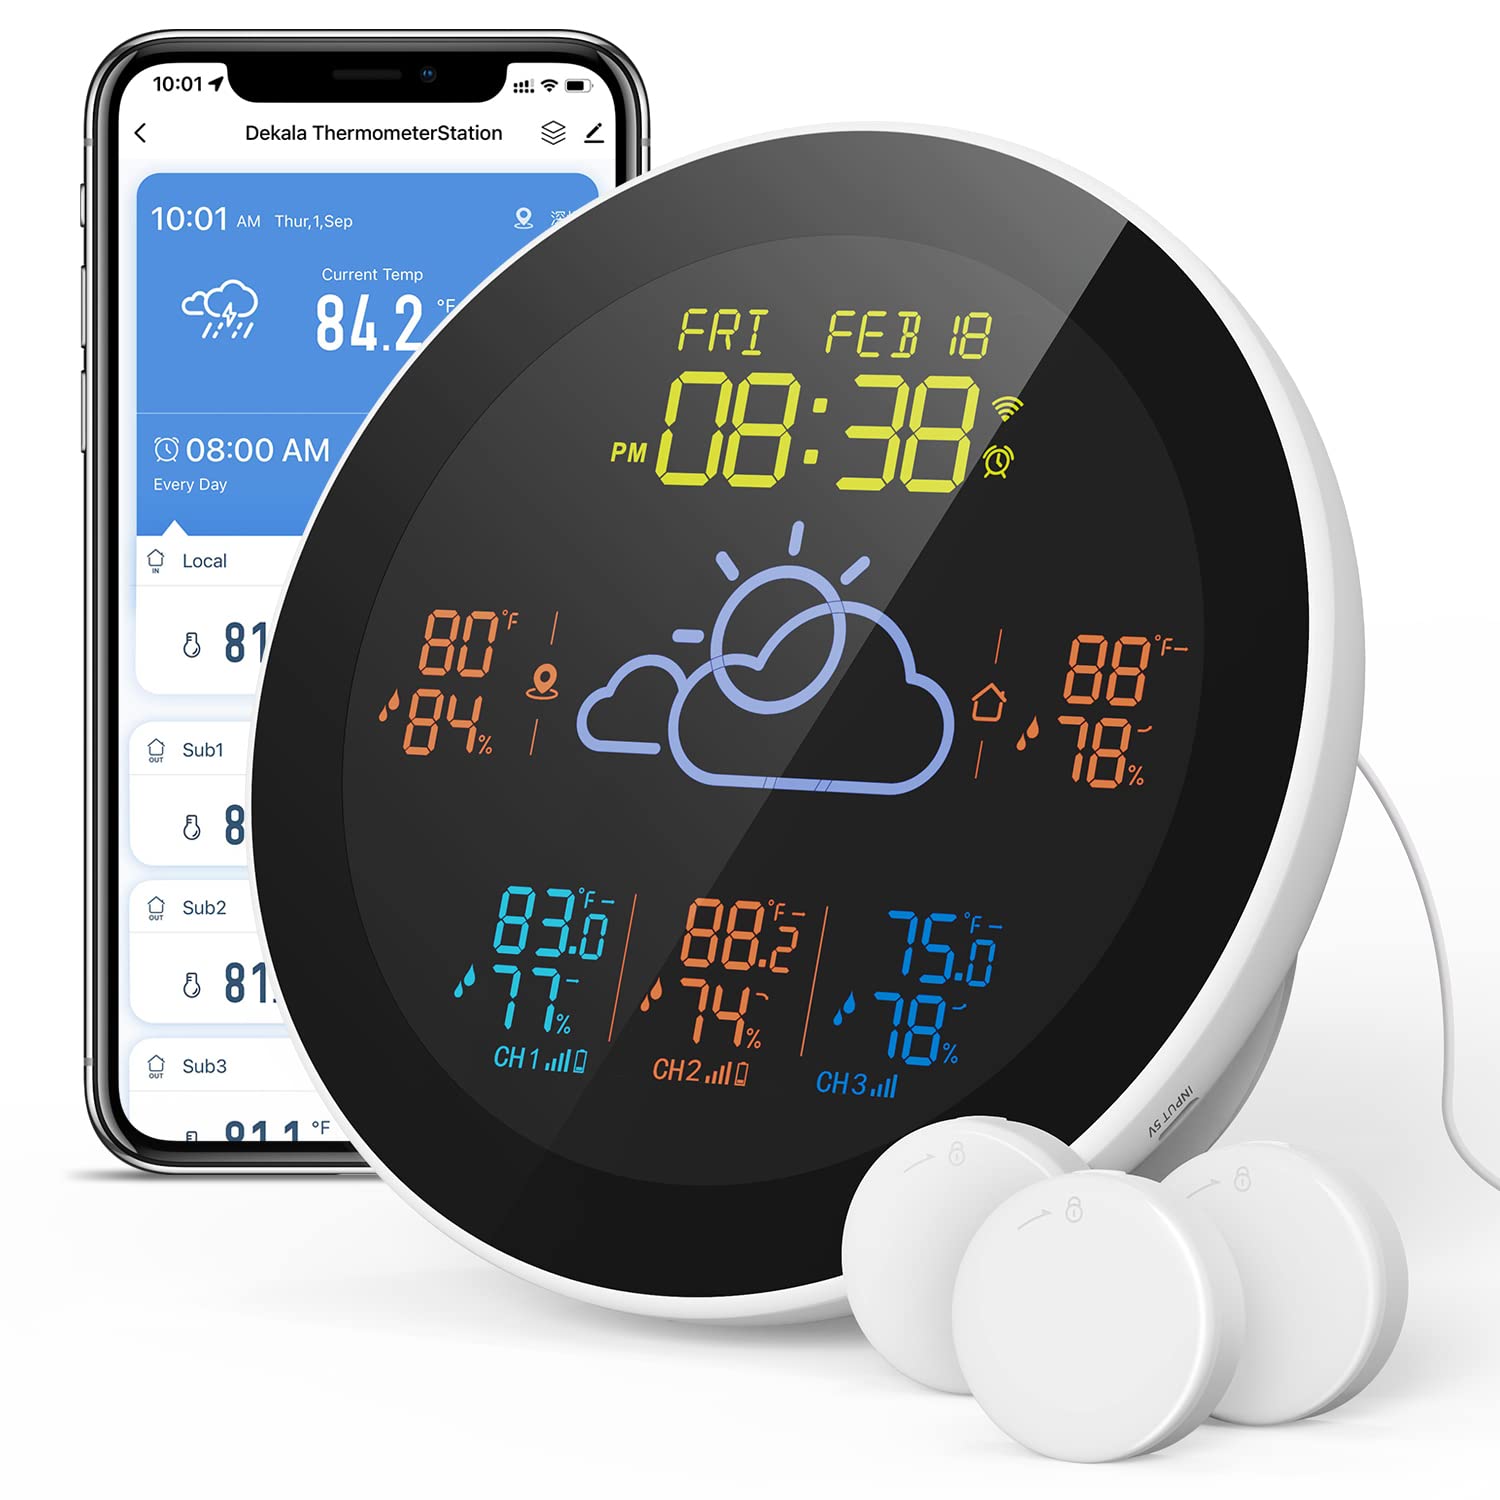 Dekala WiFi Hygrometer Thermometer Wireless Weather Station with 3  Rechargeable Remote Sensor for Home Basement Pets Bedroom Greenhouse